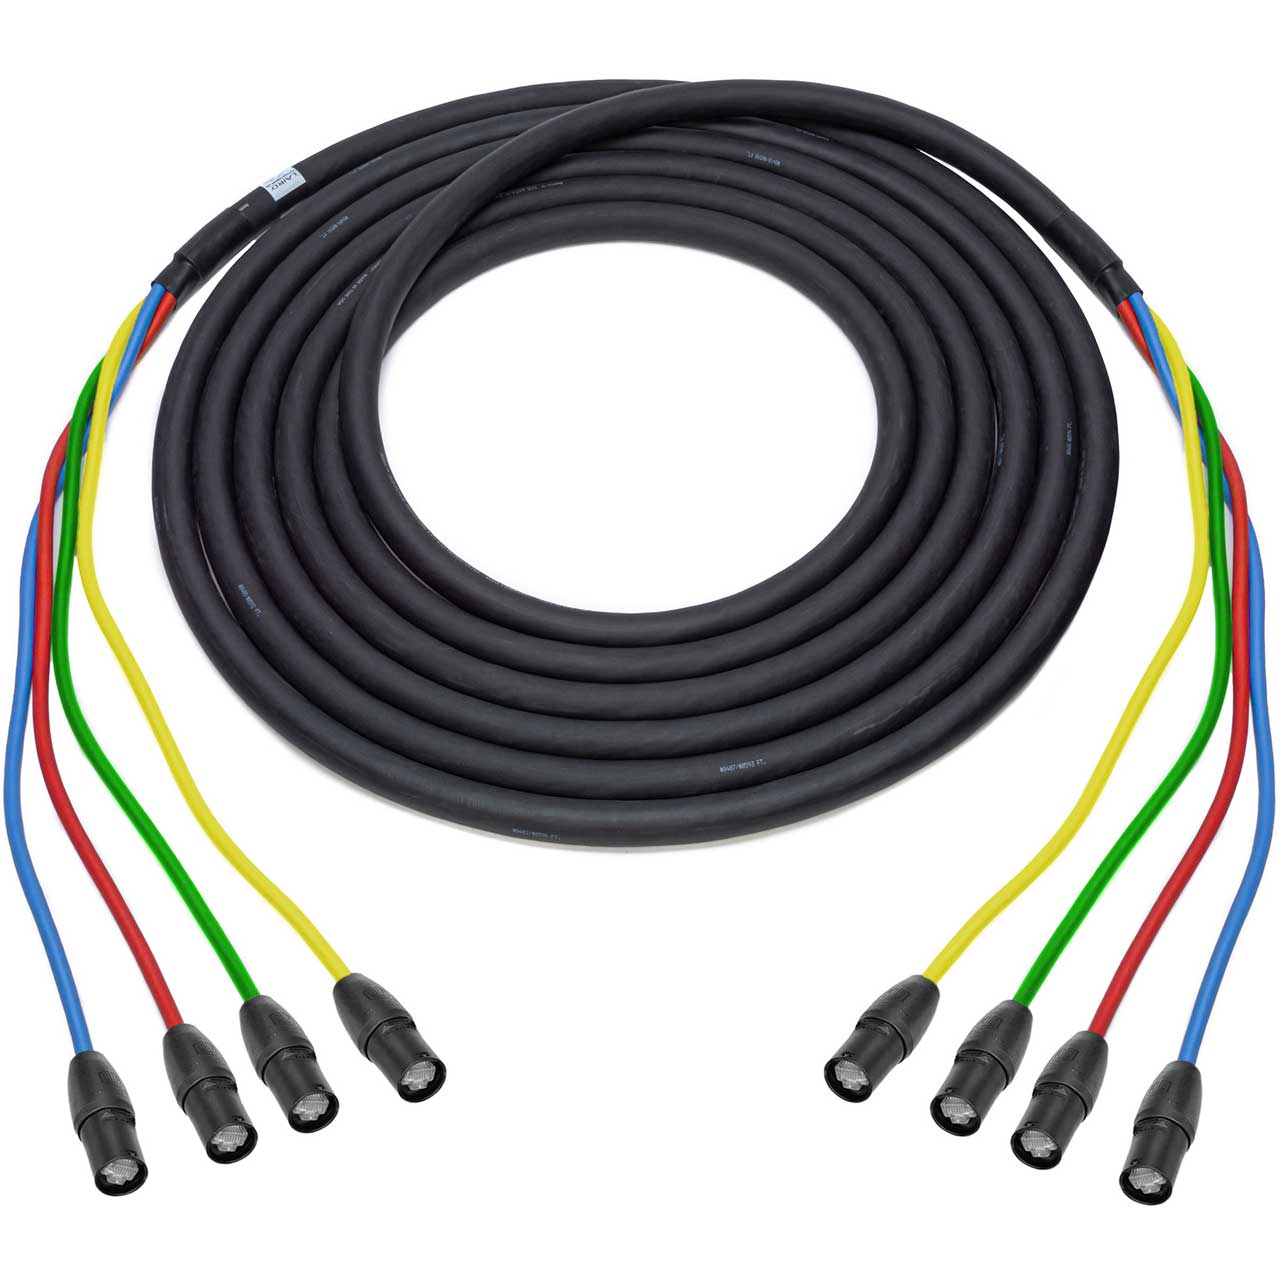 Laird CAT6AXTRM4EE-100 4 Channel Cat6A Tactical Cable with RJ45